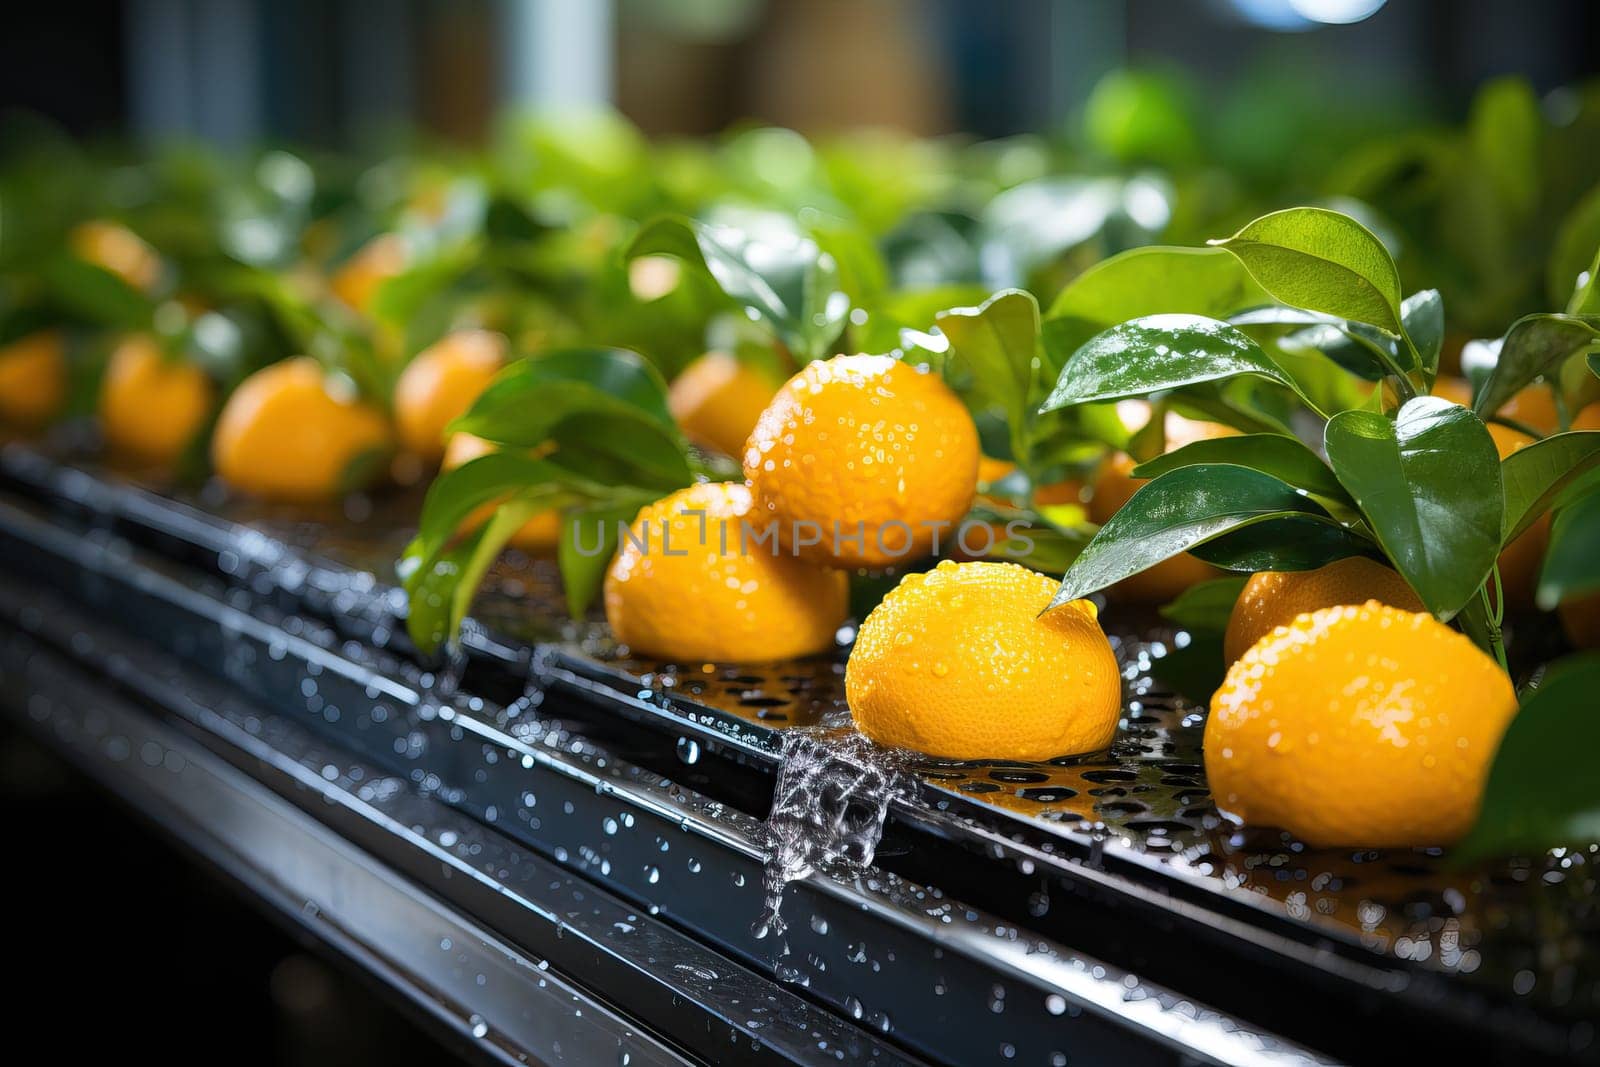 Close up orange citrus washing on conveyor belt at fruits automation water spray cleaning machine in production line of fruits manufacturing. Agricultural industry and innovation technology concept.